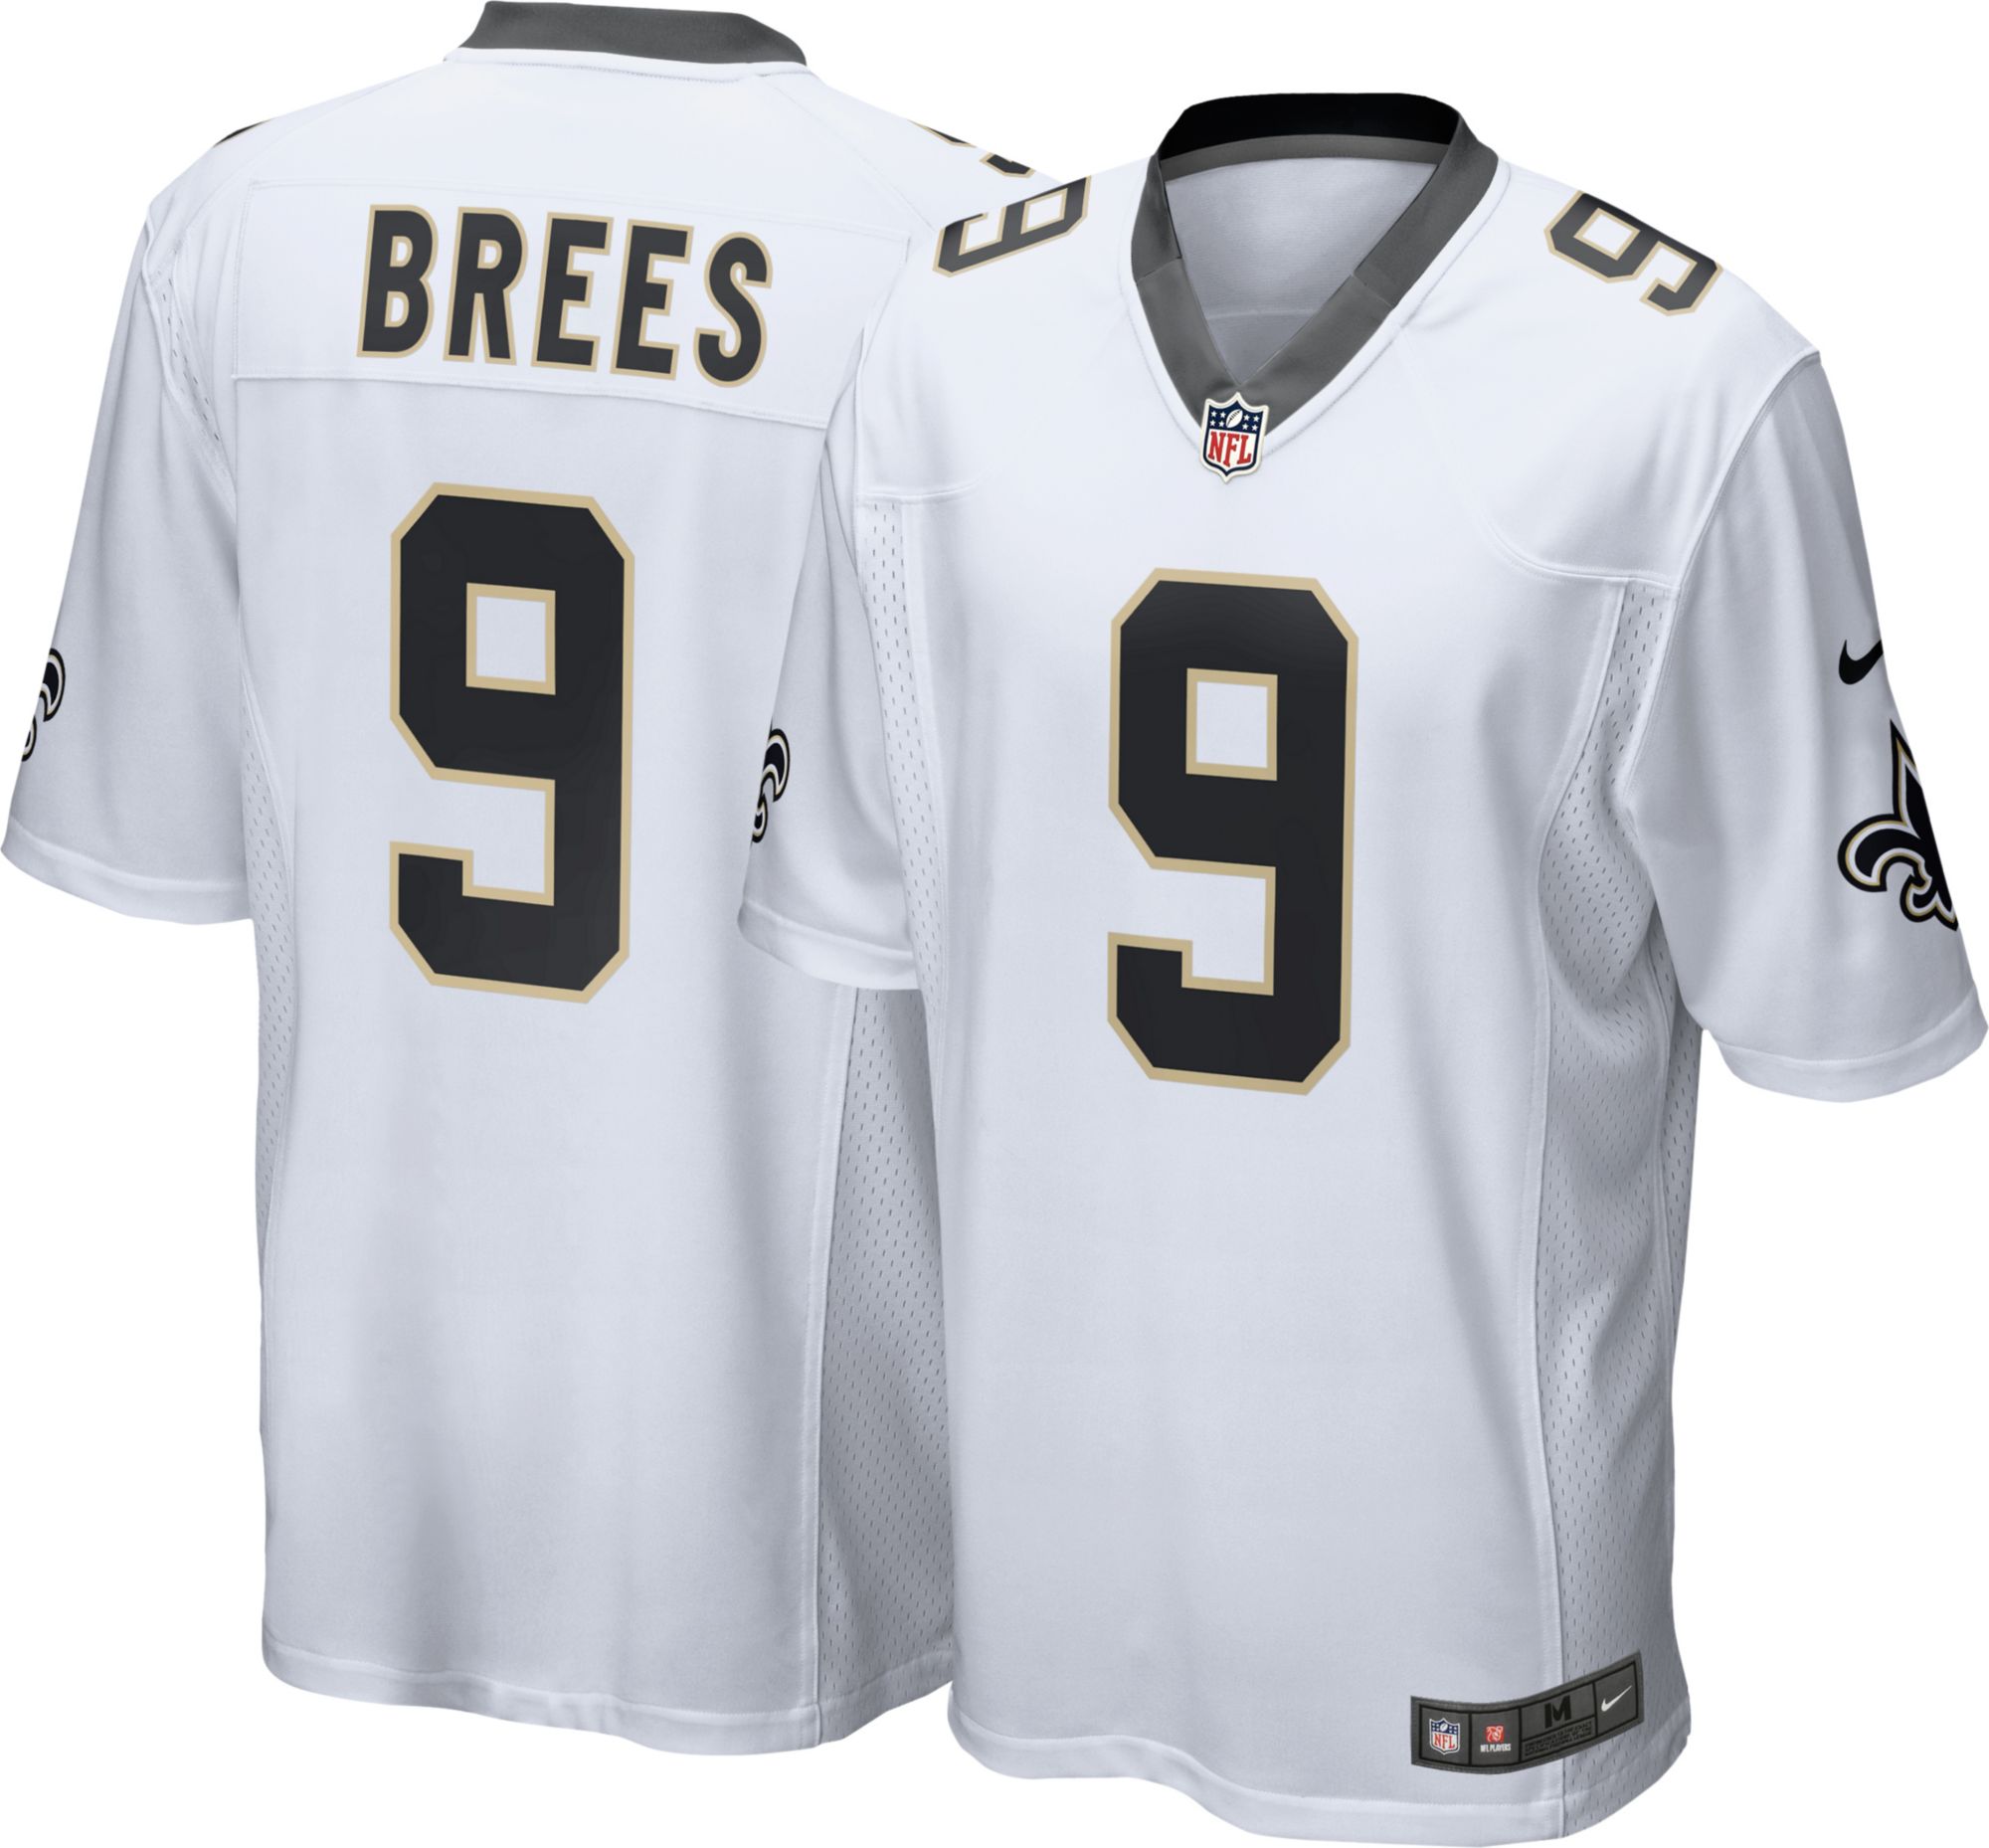 what is drew brees number on the jersey